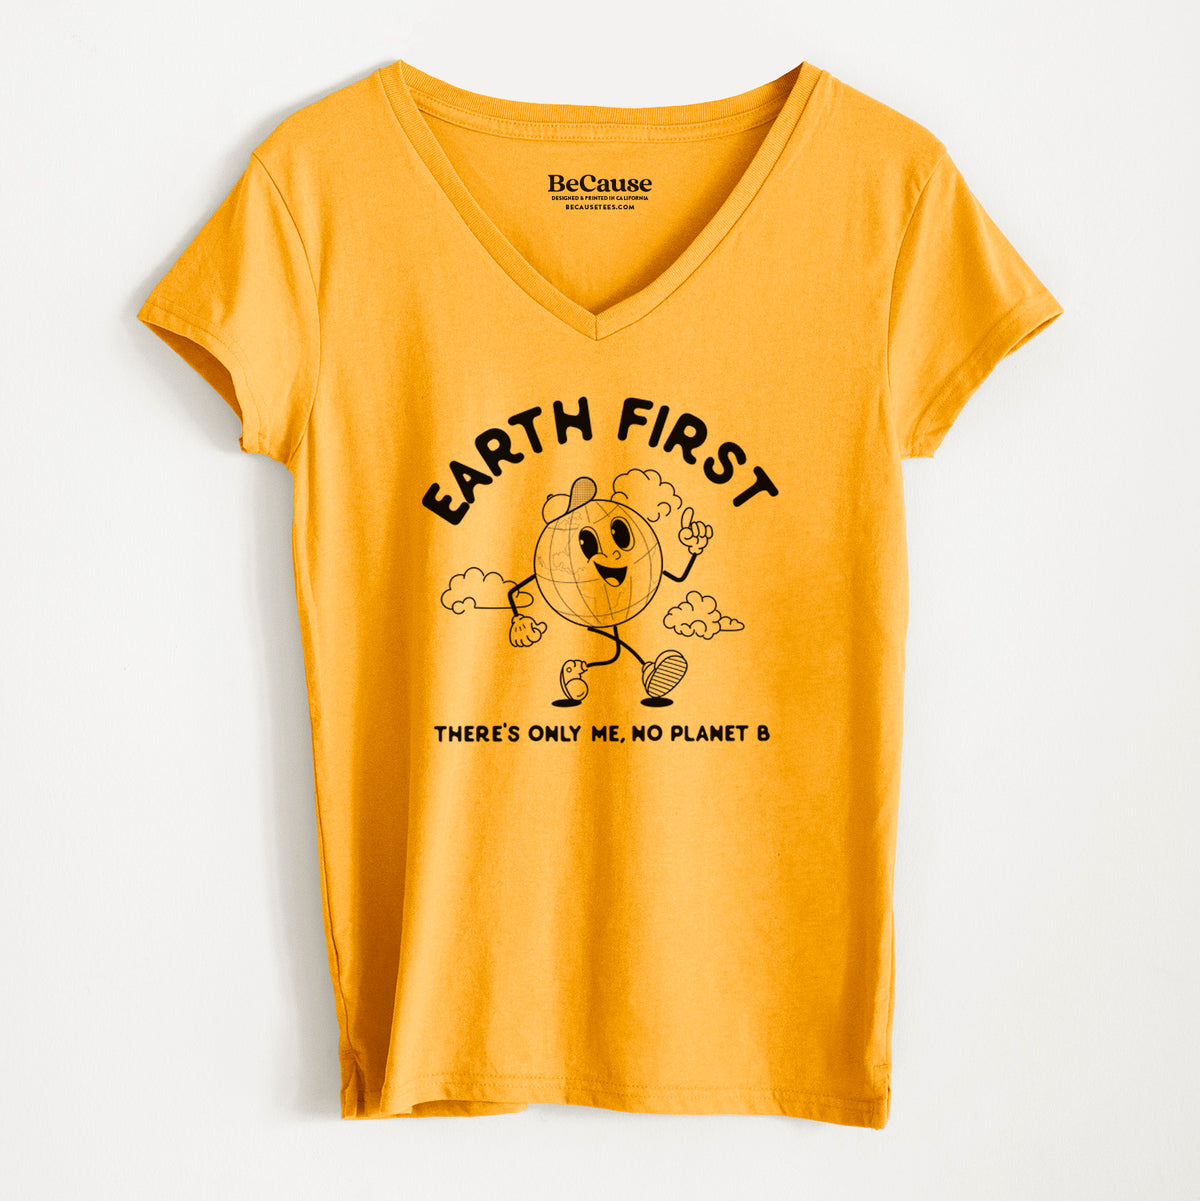 Earth First - There&#39;s Only Me, No Planet B - Women&#39;s 100% Recycled V-neck